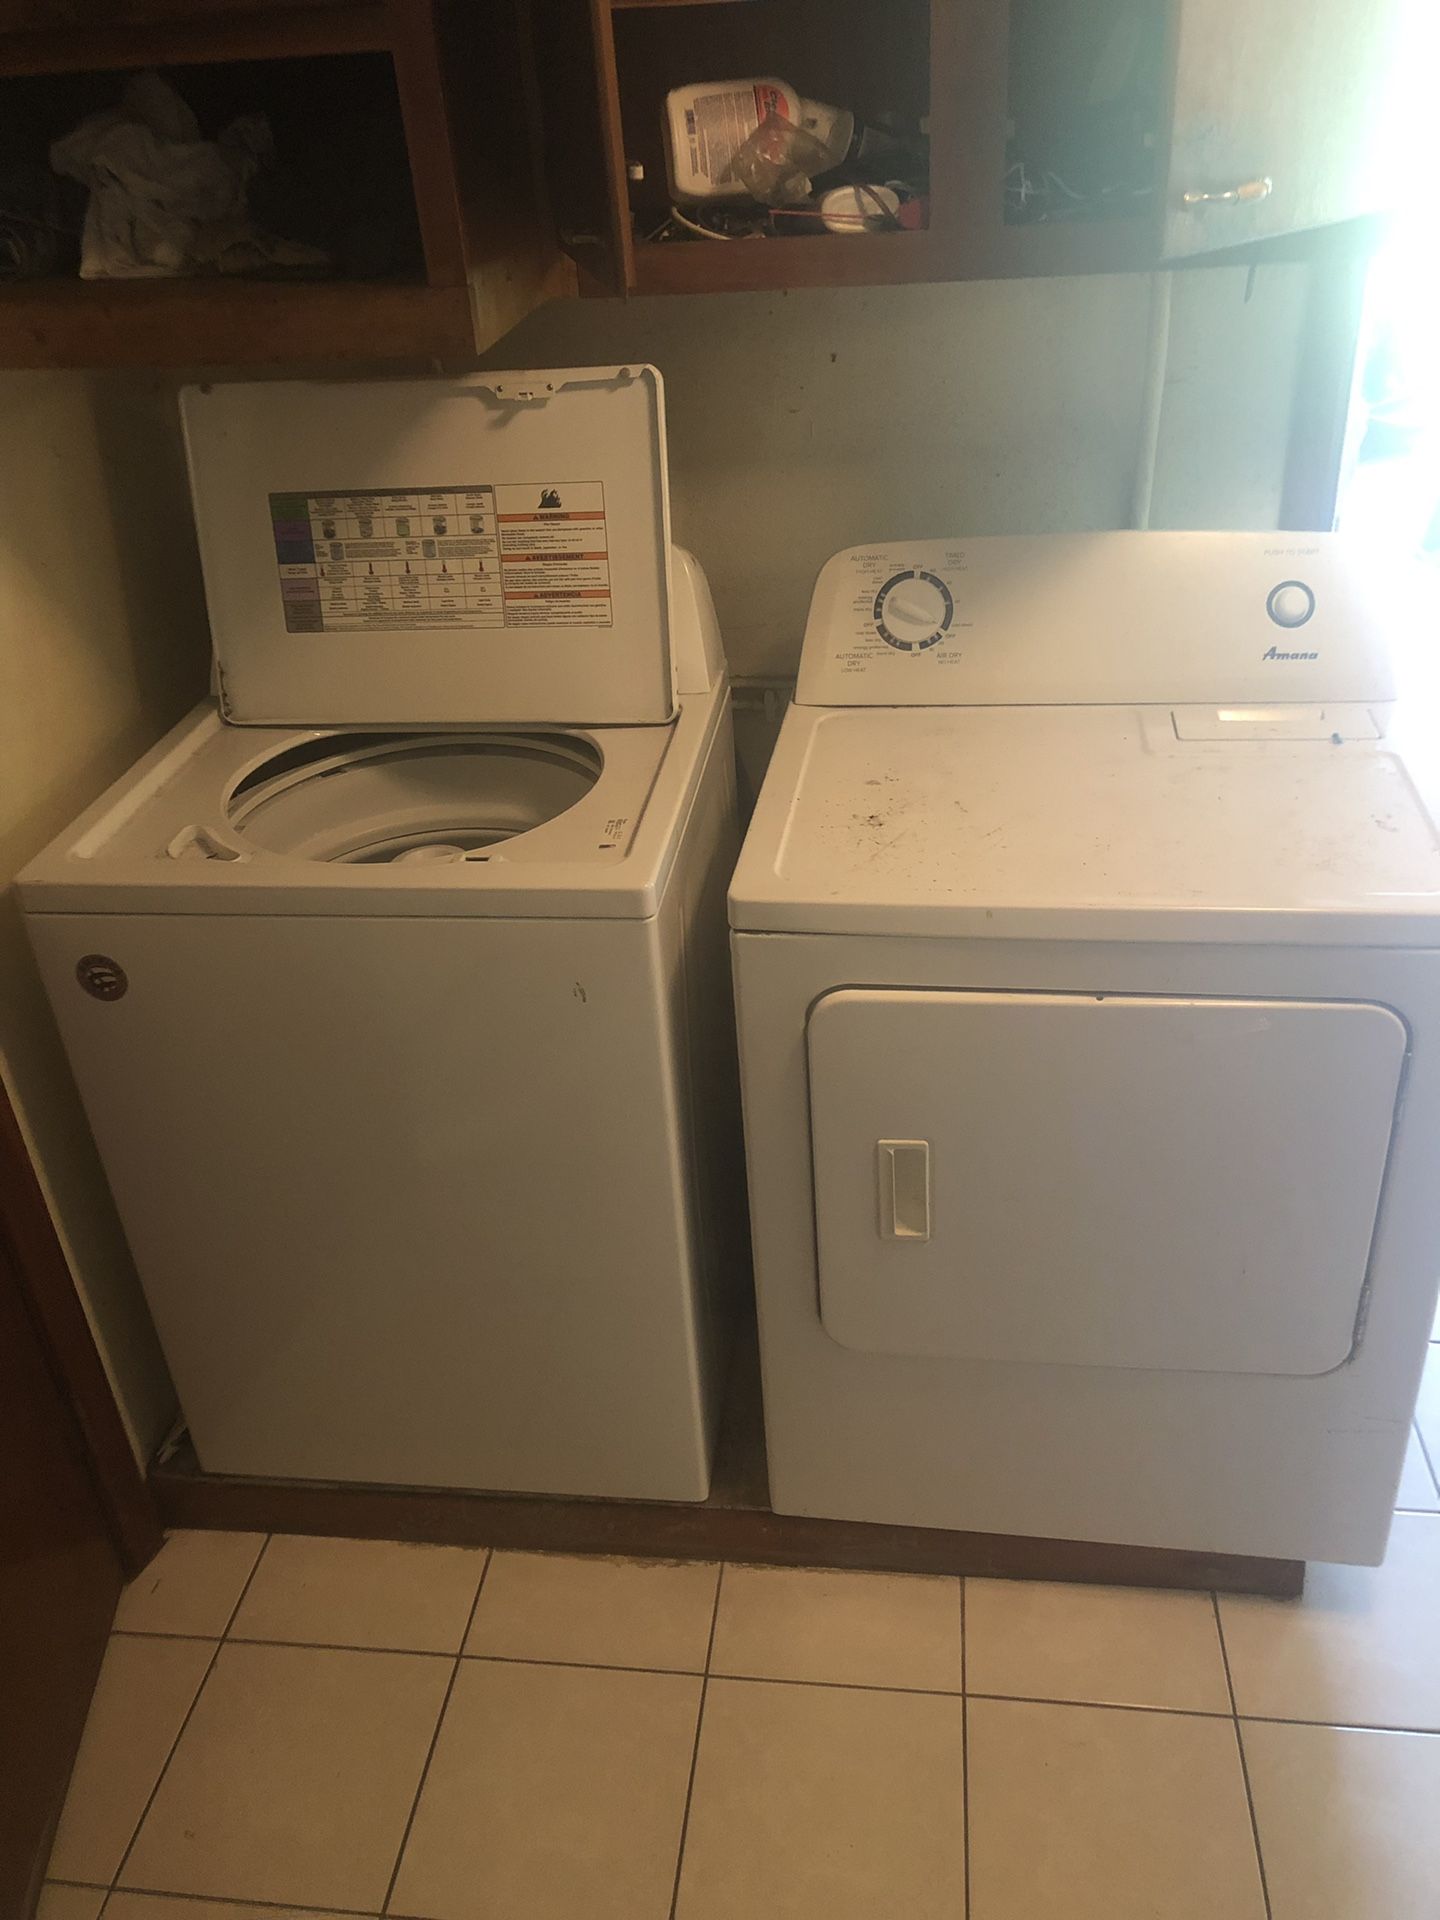 Washer and dryer sit